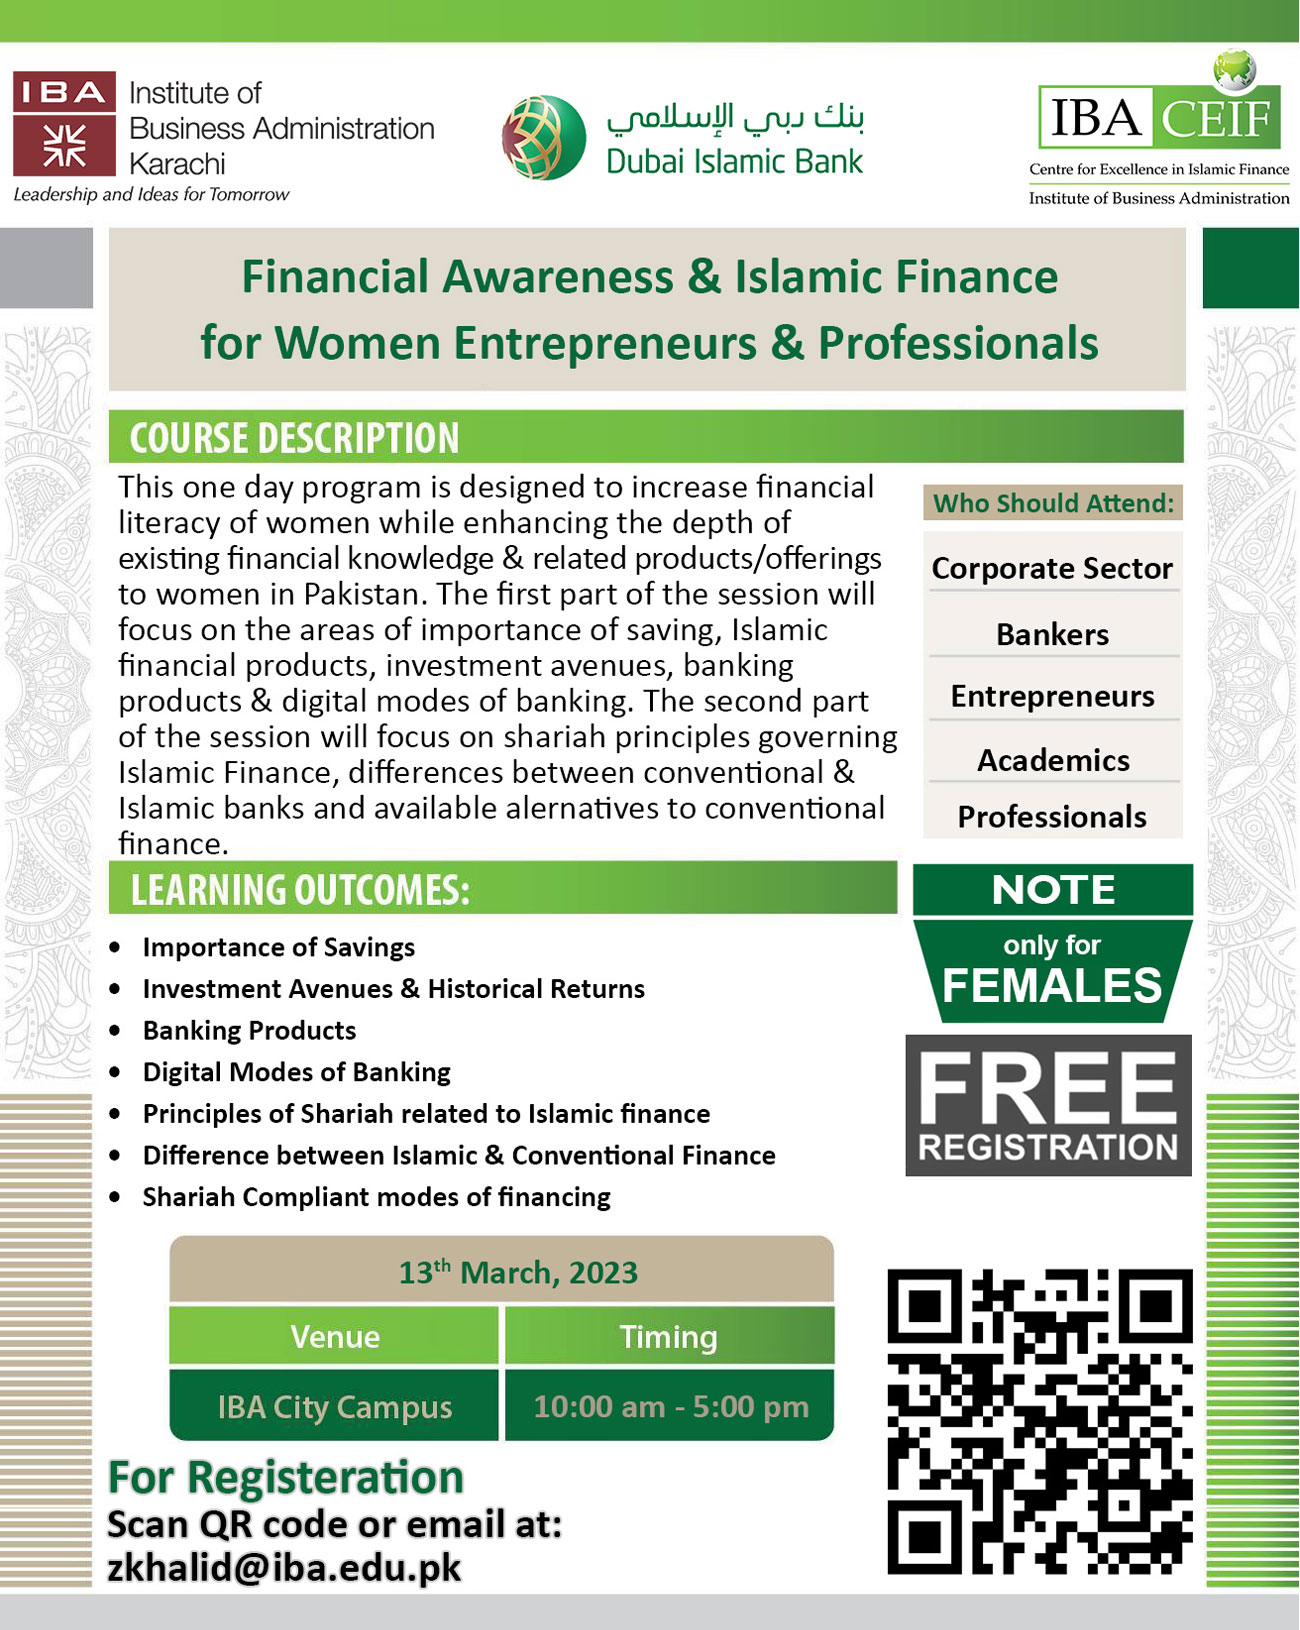 Financial Awareness & Islamic Finance for Women Entrepreneurs and Professionals